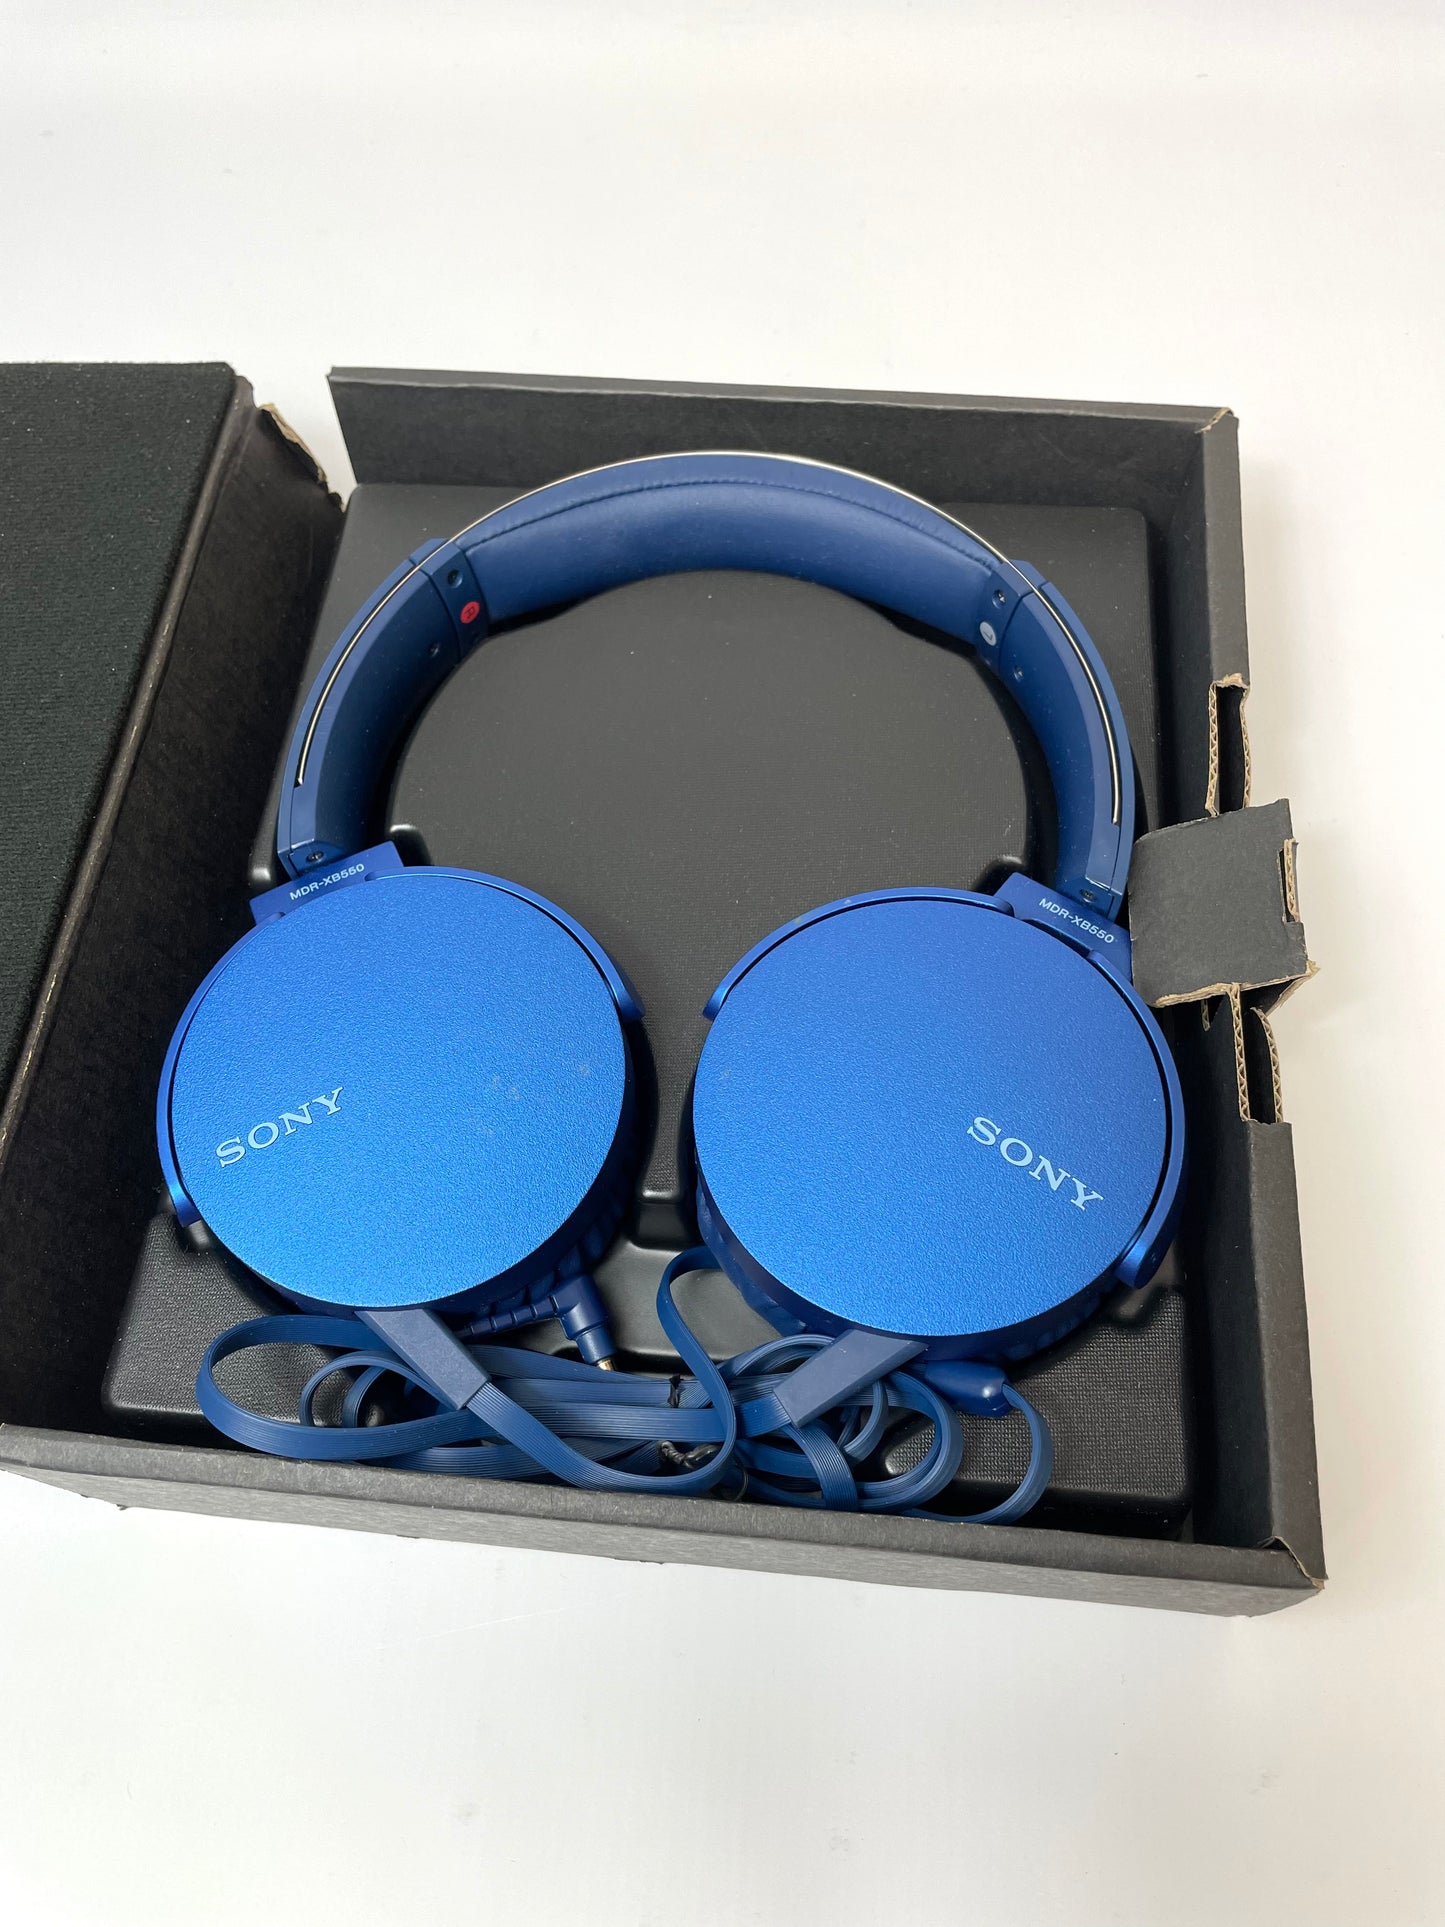 Sony MDR-XB550AP Extra Bass Wired Headphones Blue